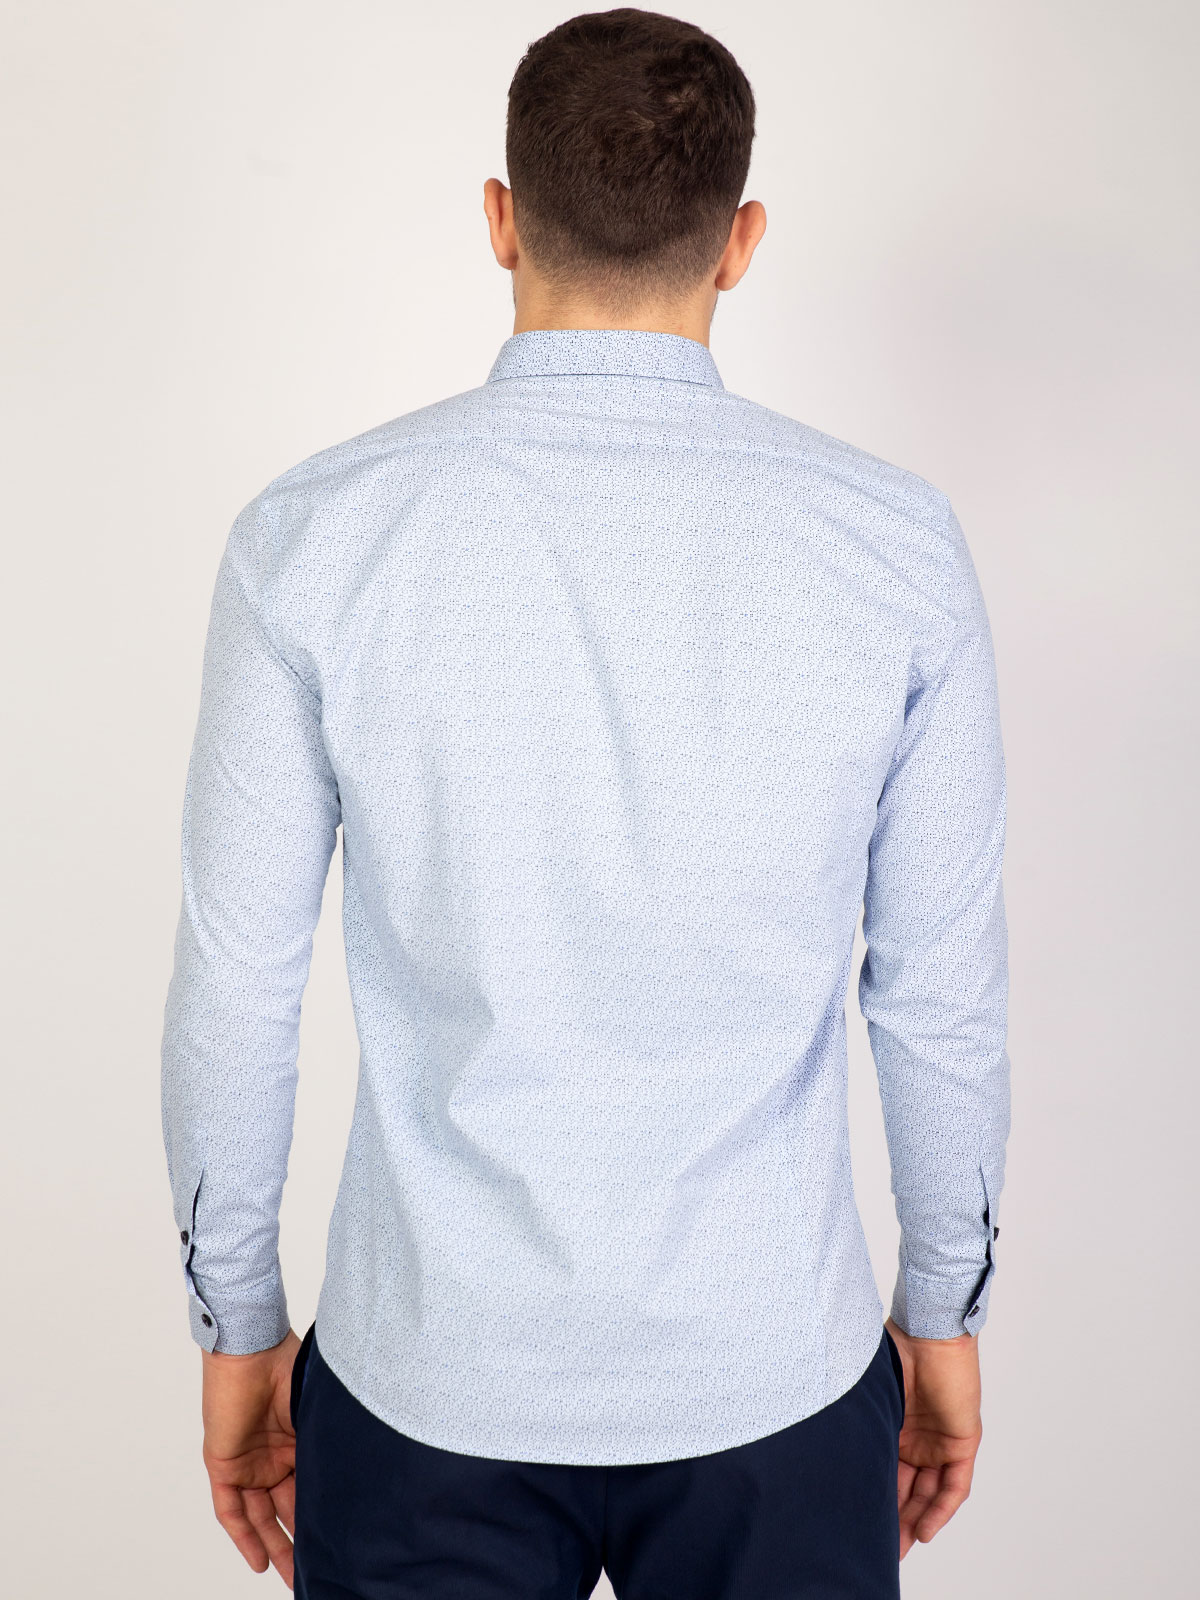 Light blue shirt with small dots - 21483 € 27.00 img2